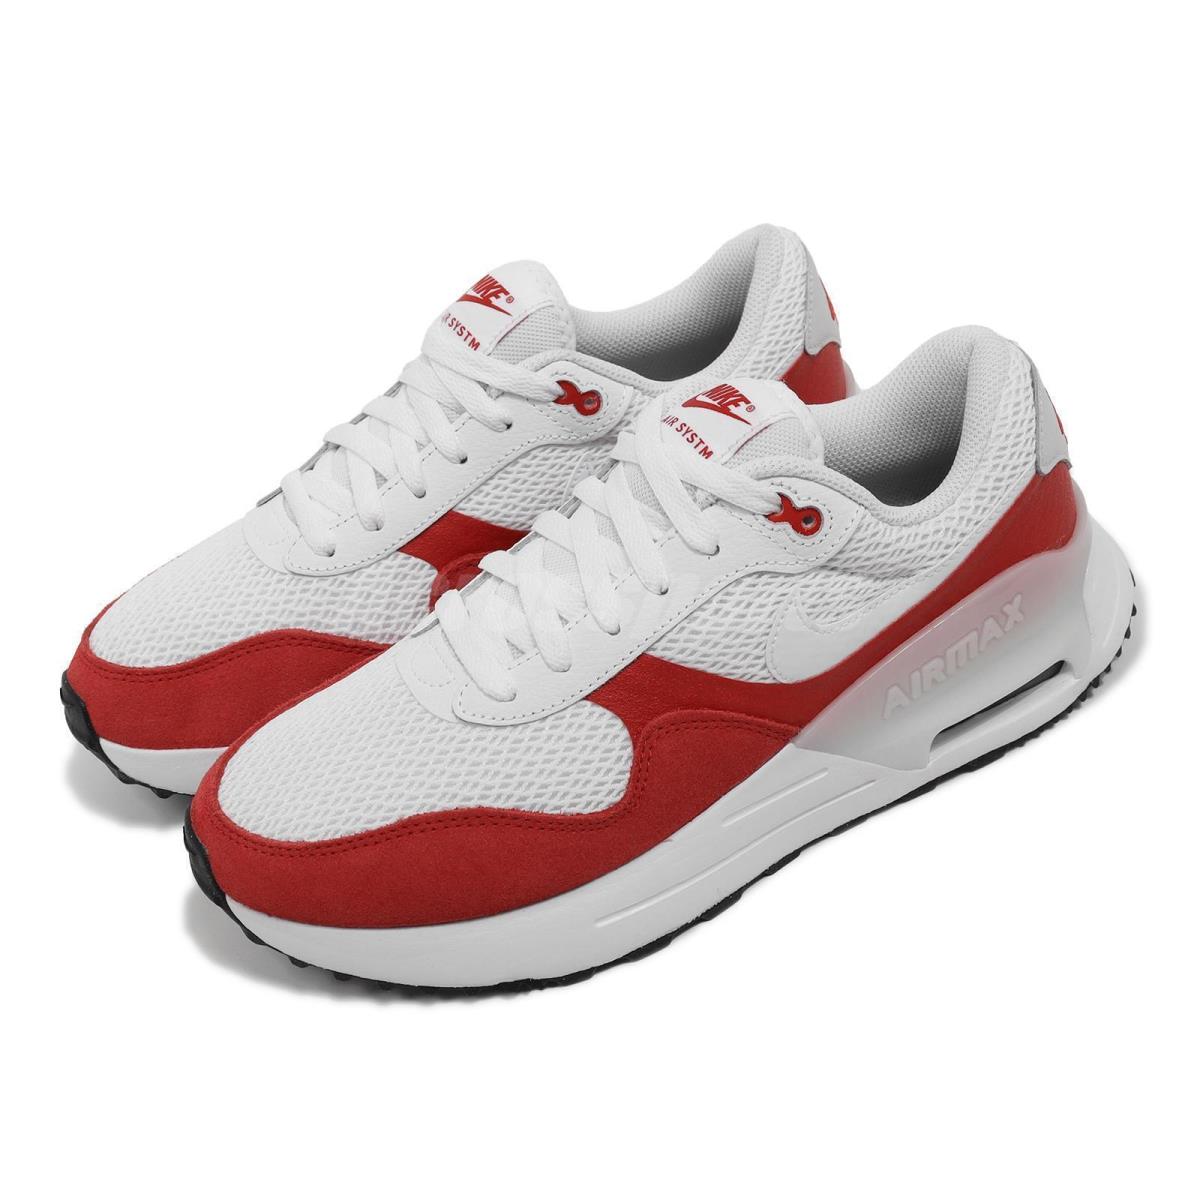 Men`s Nike DM9537 104 Air Max System White/red Running Shoes Sneakers